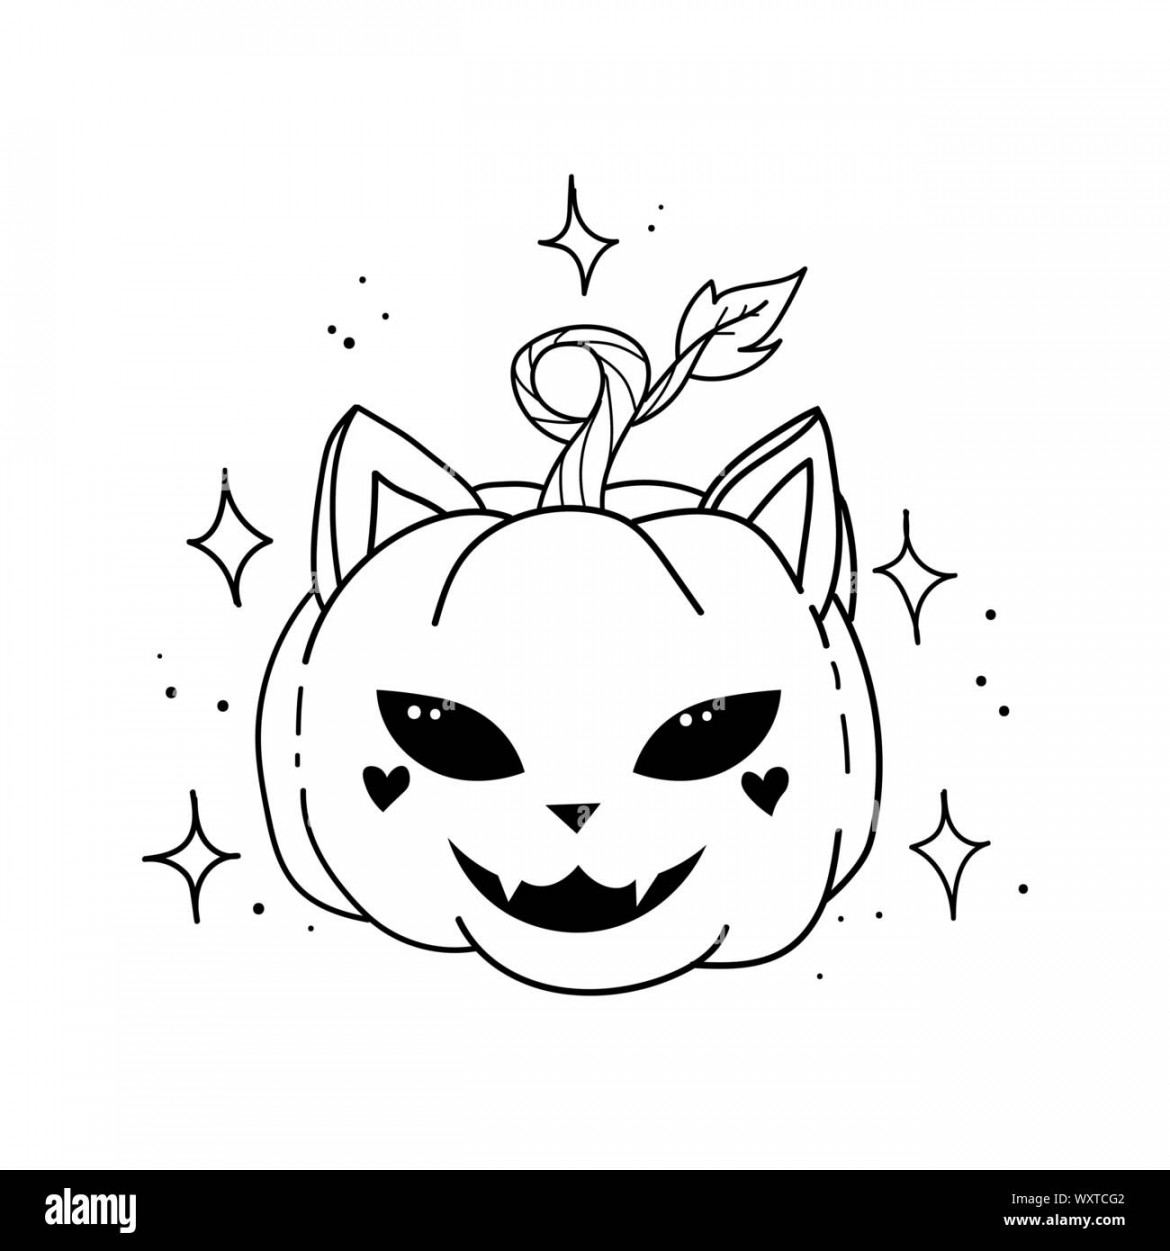 cat head and face carved on a pumpkin drawing